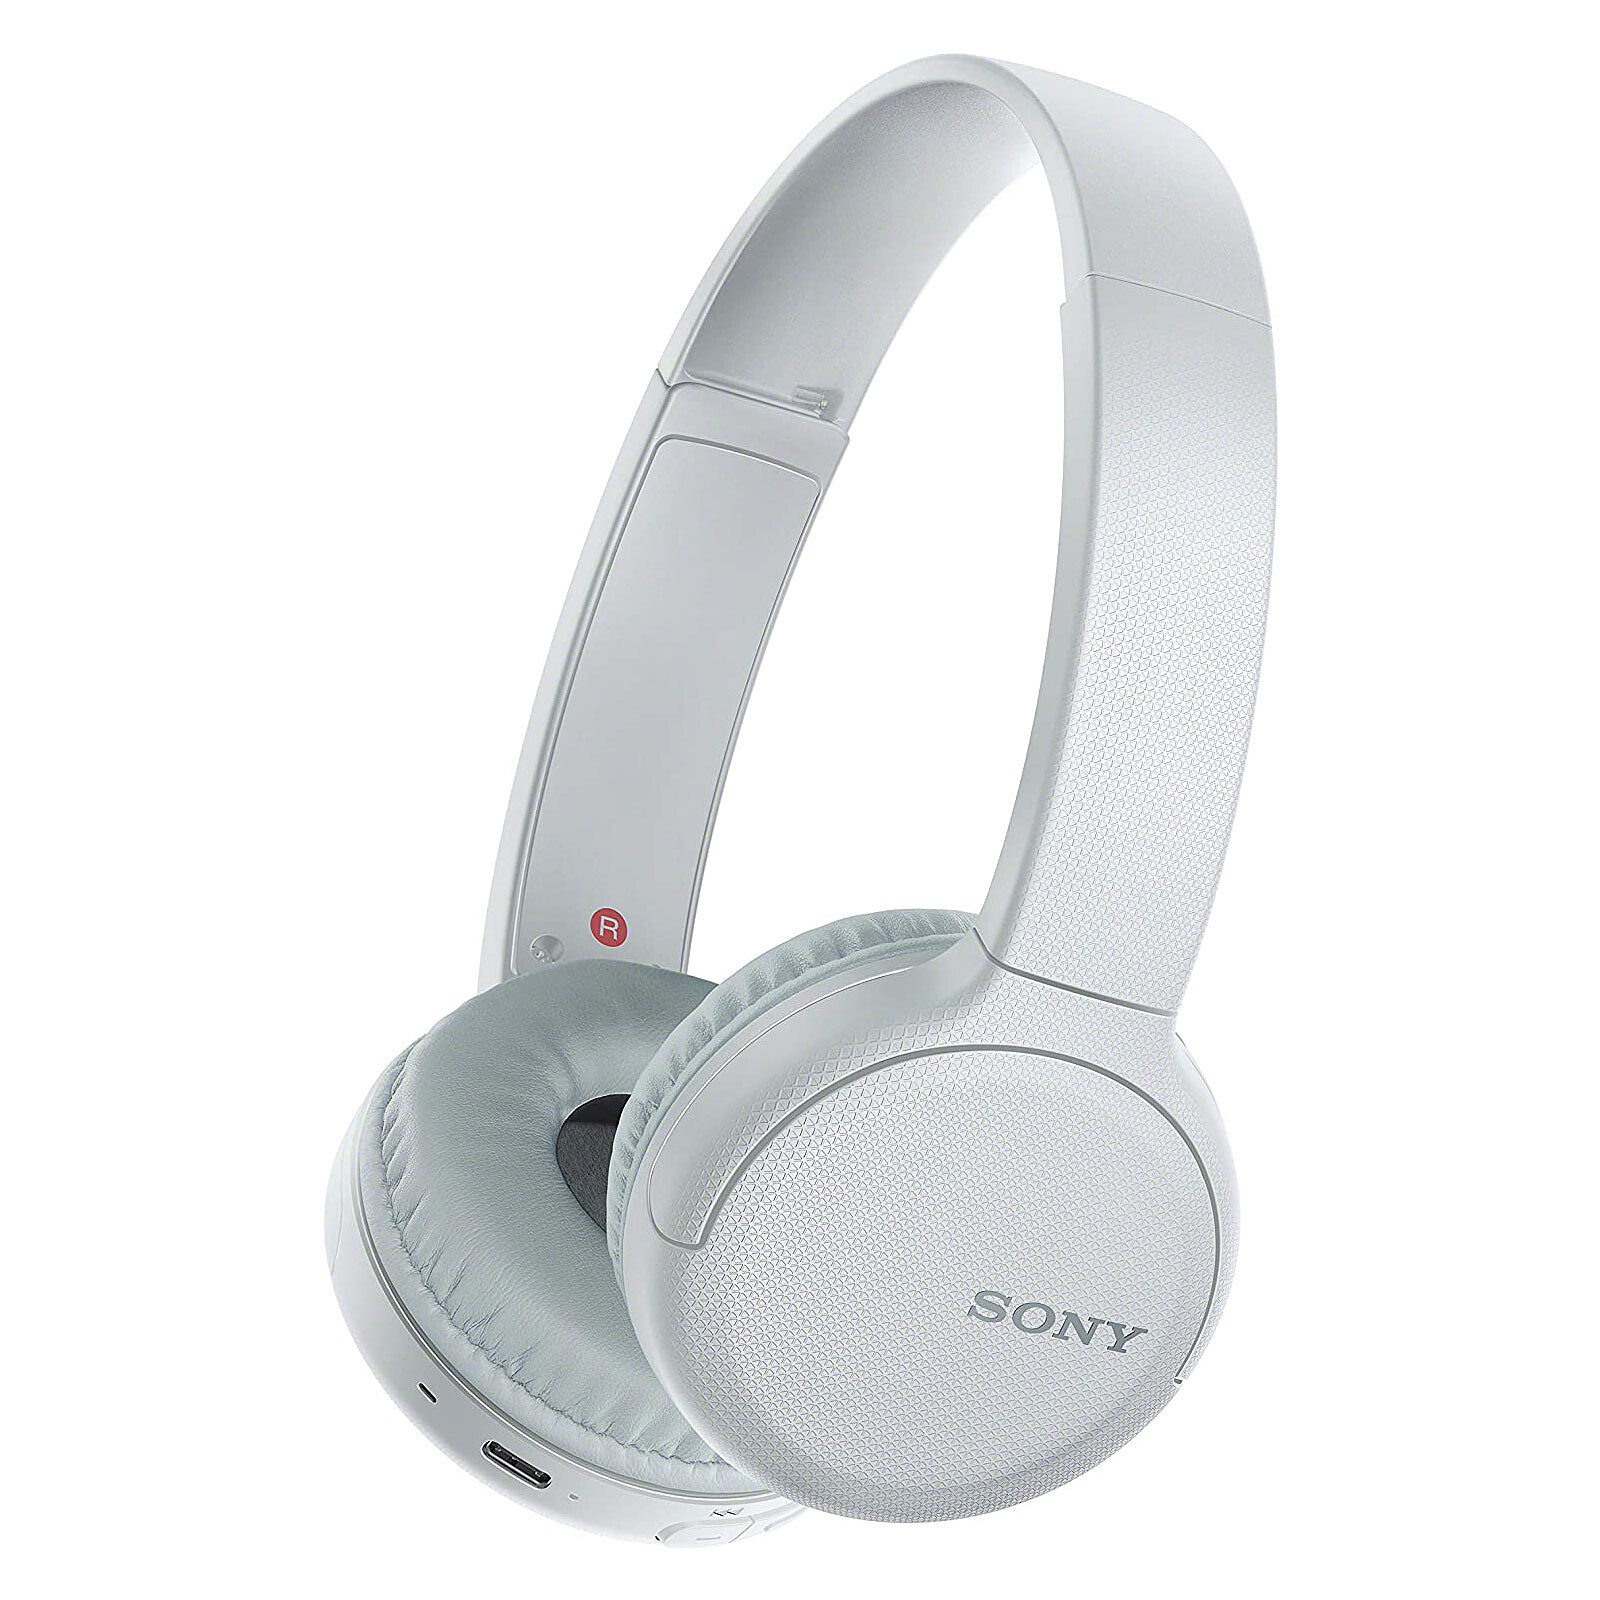 Sony WH-CH510 Wireless On-Ear Headphones with USB Bluetooth Dongle